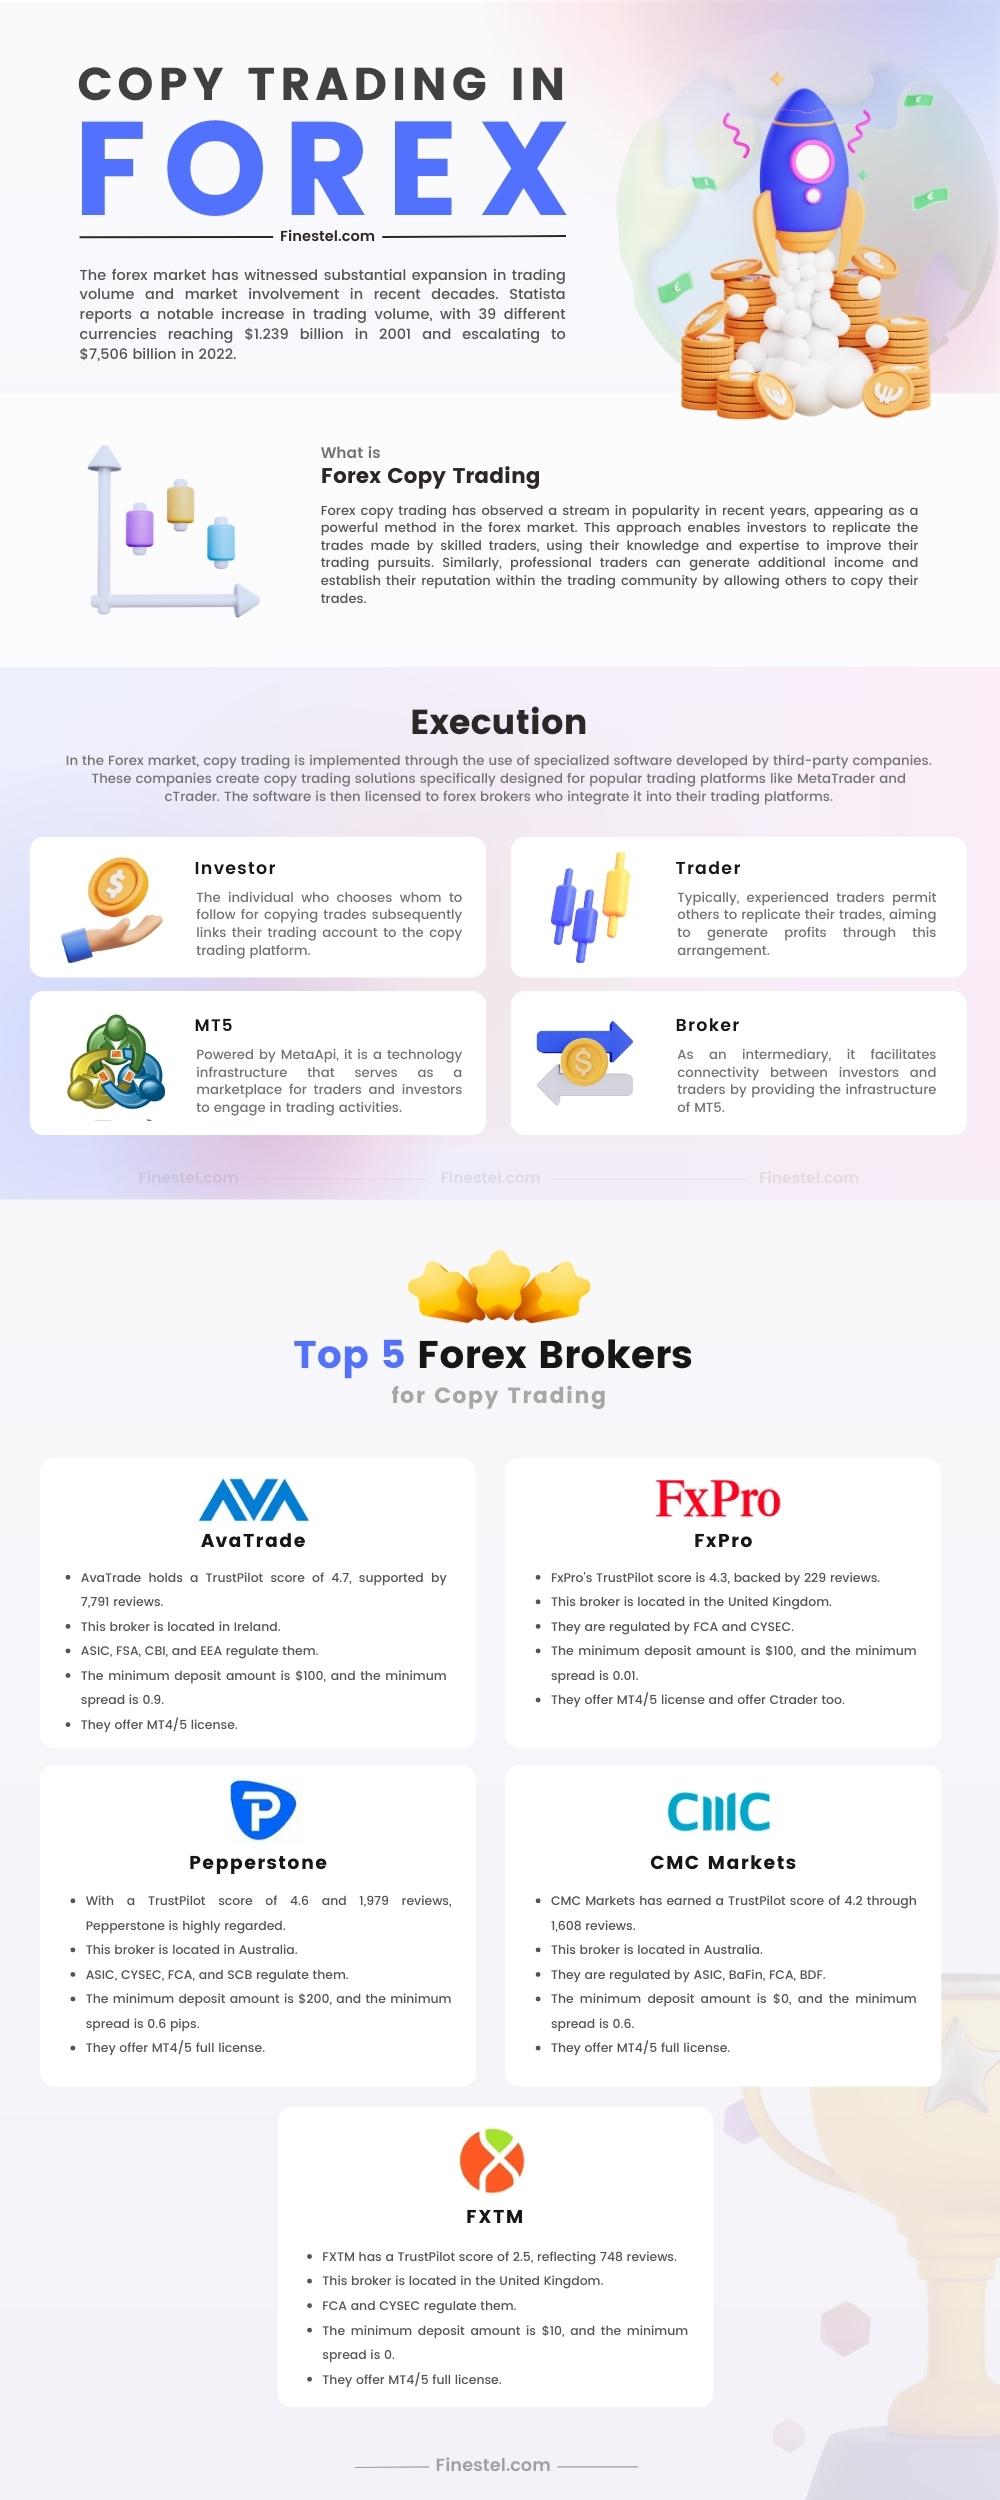 Mirror Trading in Forex Infographic